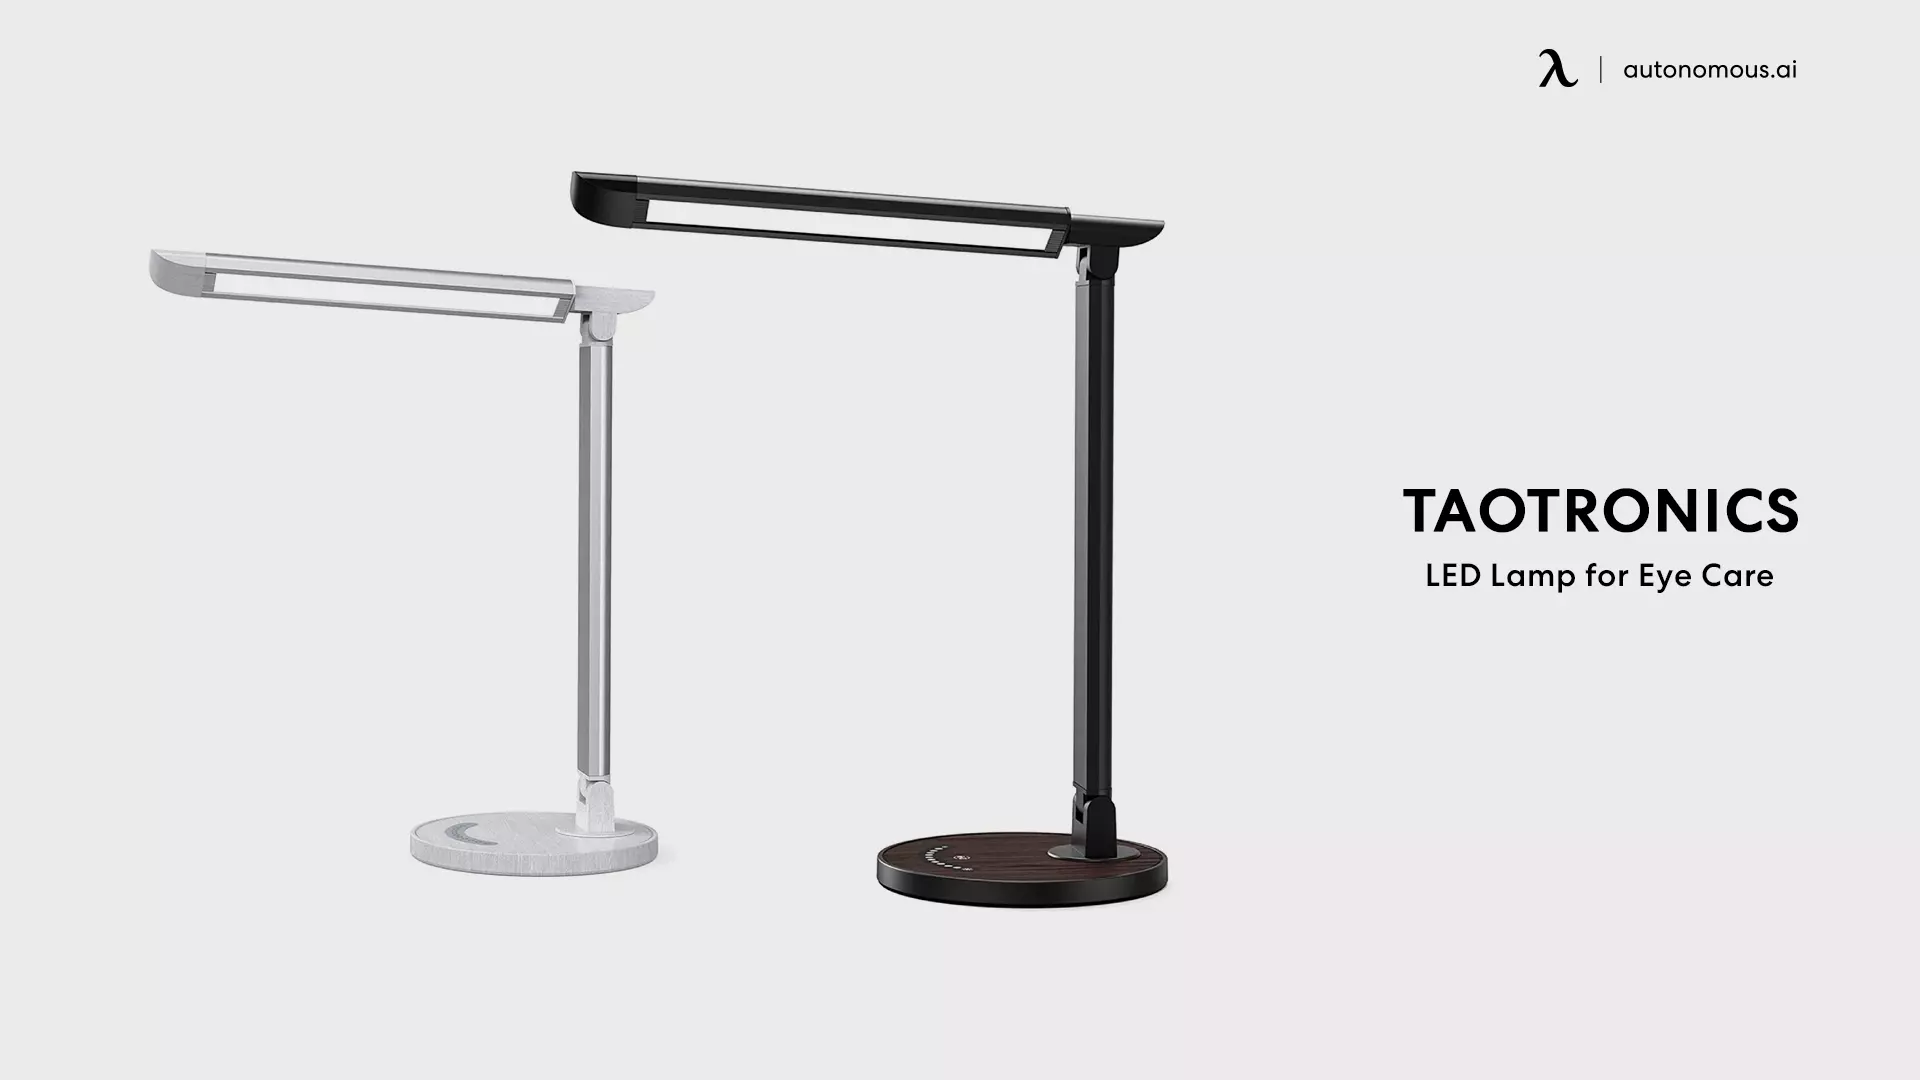 LED Lamp for Eye Care by TaoTronics